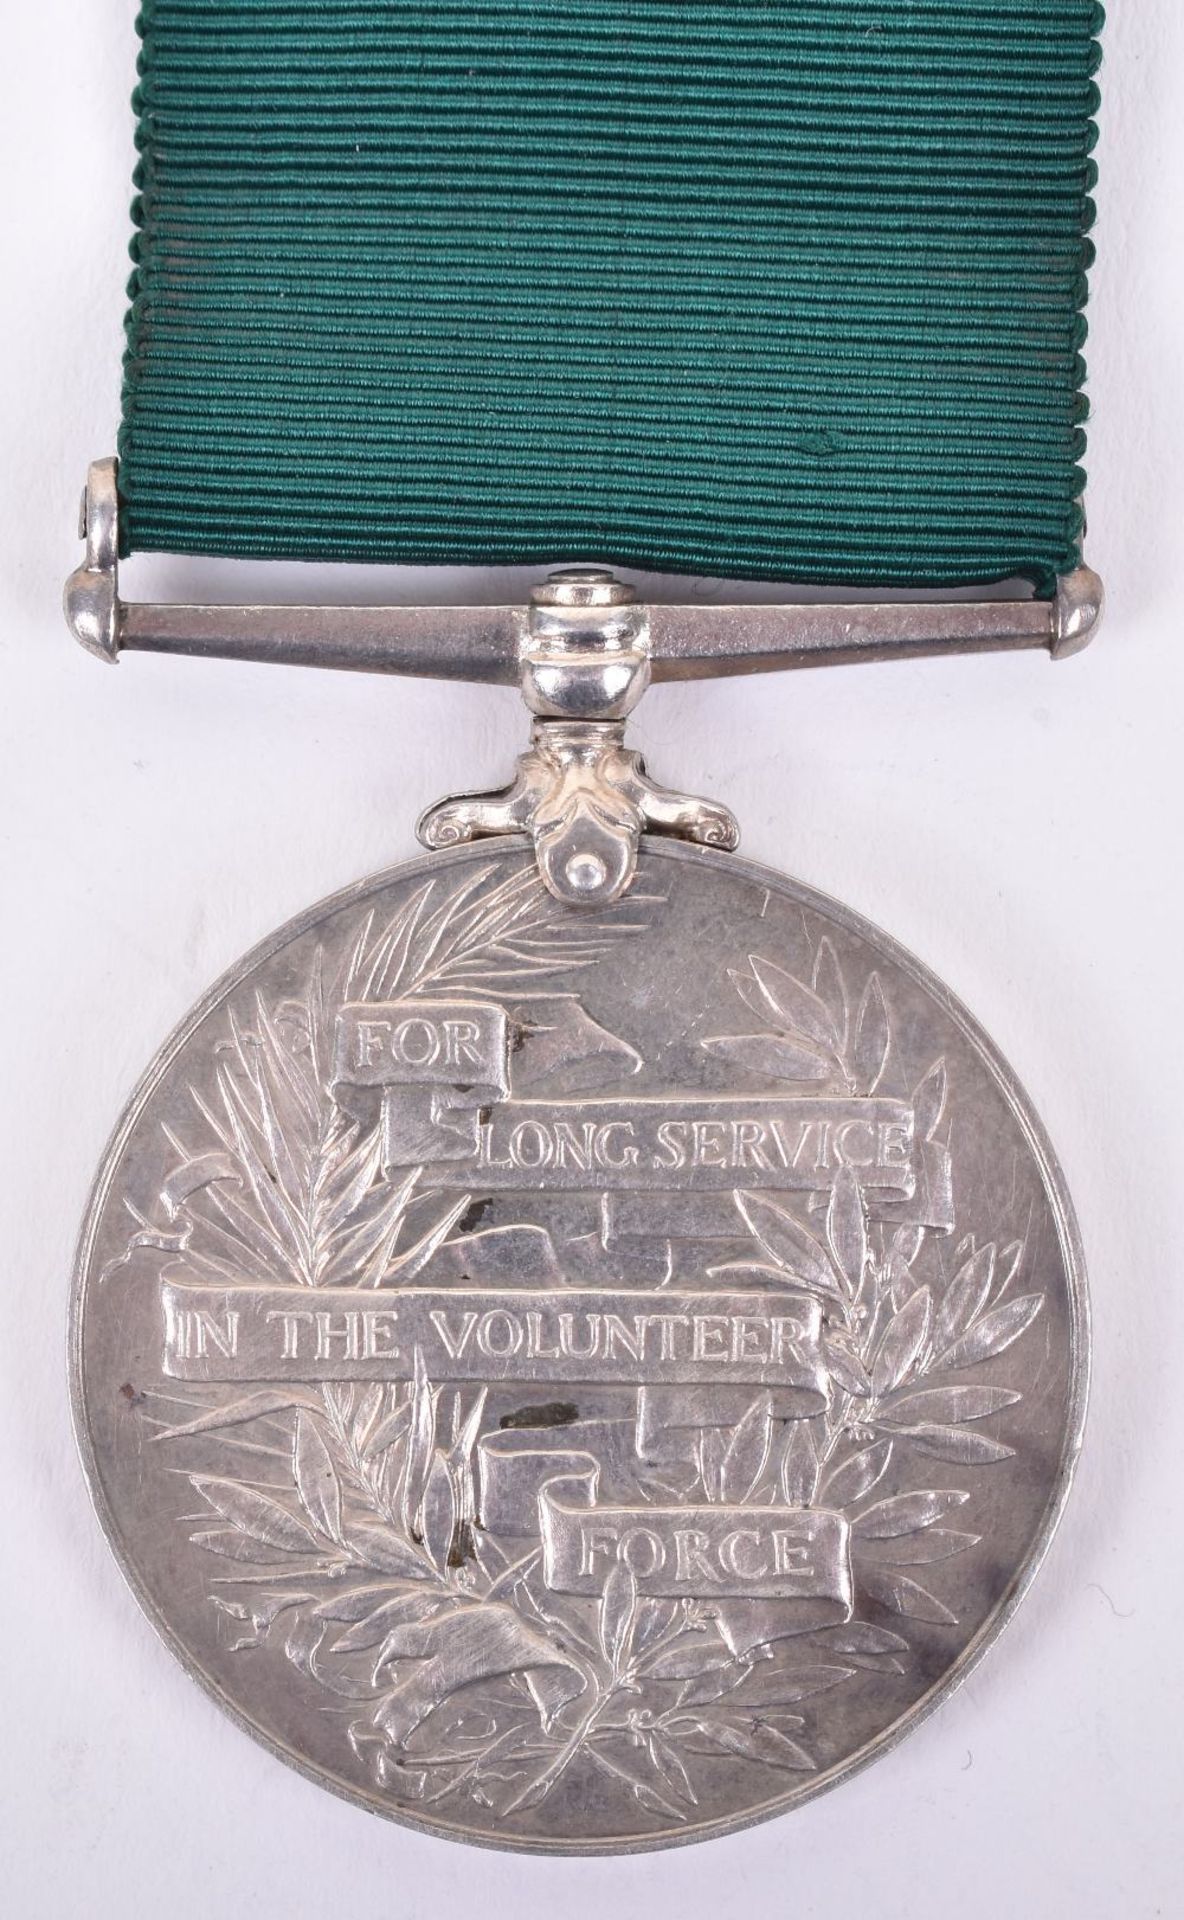 Edward VII Volunteer Force Long Service Medal 18th Middlesex Volunteer Rifle Corps - Image 3 of 3